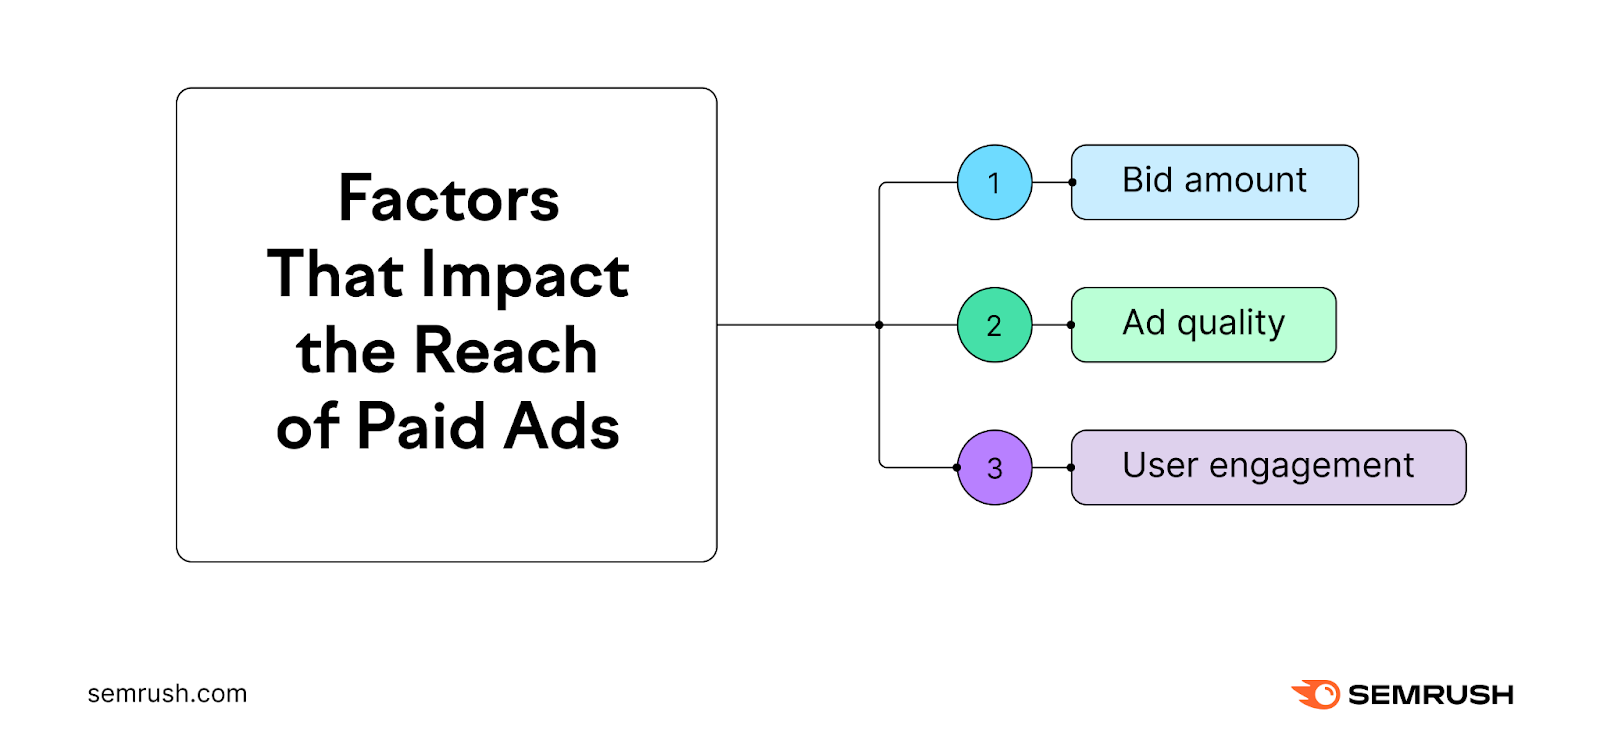 Factors that impact the reach of paid ads include bid amount, ad quality and user engagement